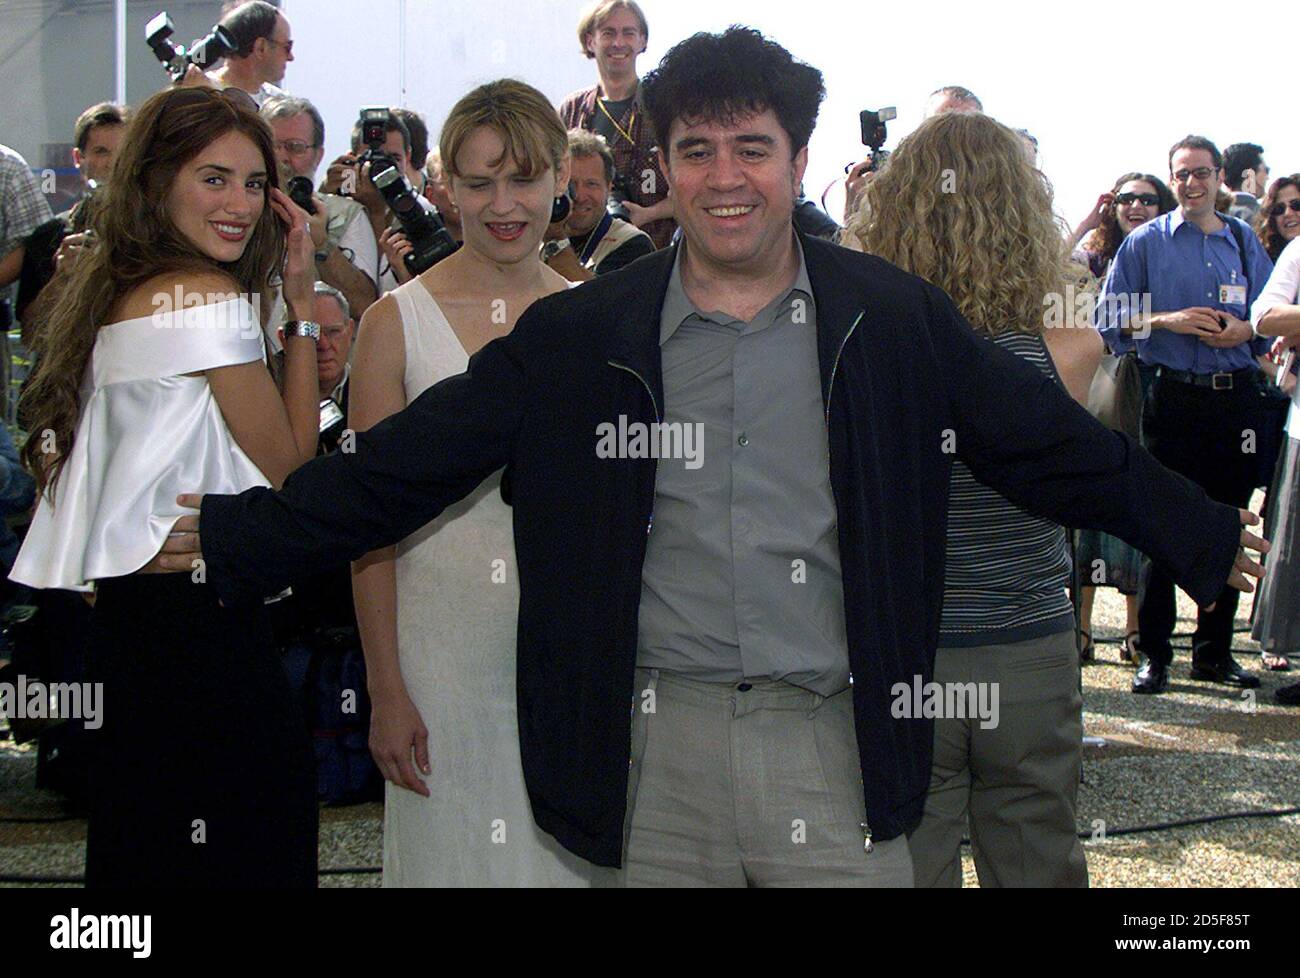 Spanish director Pedro Almodovar (C) gestures as he poses with his actresses  Antonia San Juan (2nd L) and Penelope Cruz (L) during a photocall for their film 'Todo Sobre Mi Madre'  May 15. The film will be screened in competition  at the 52nd Cannes Film Festival.         ??» Stock Photo